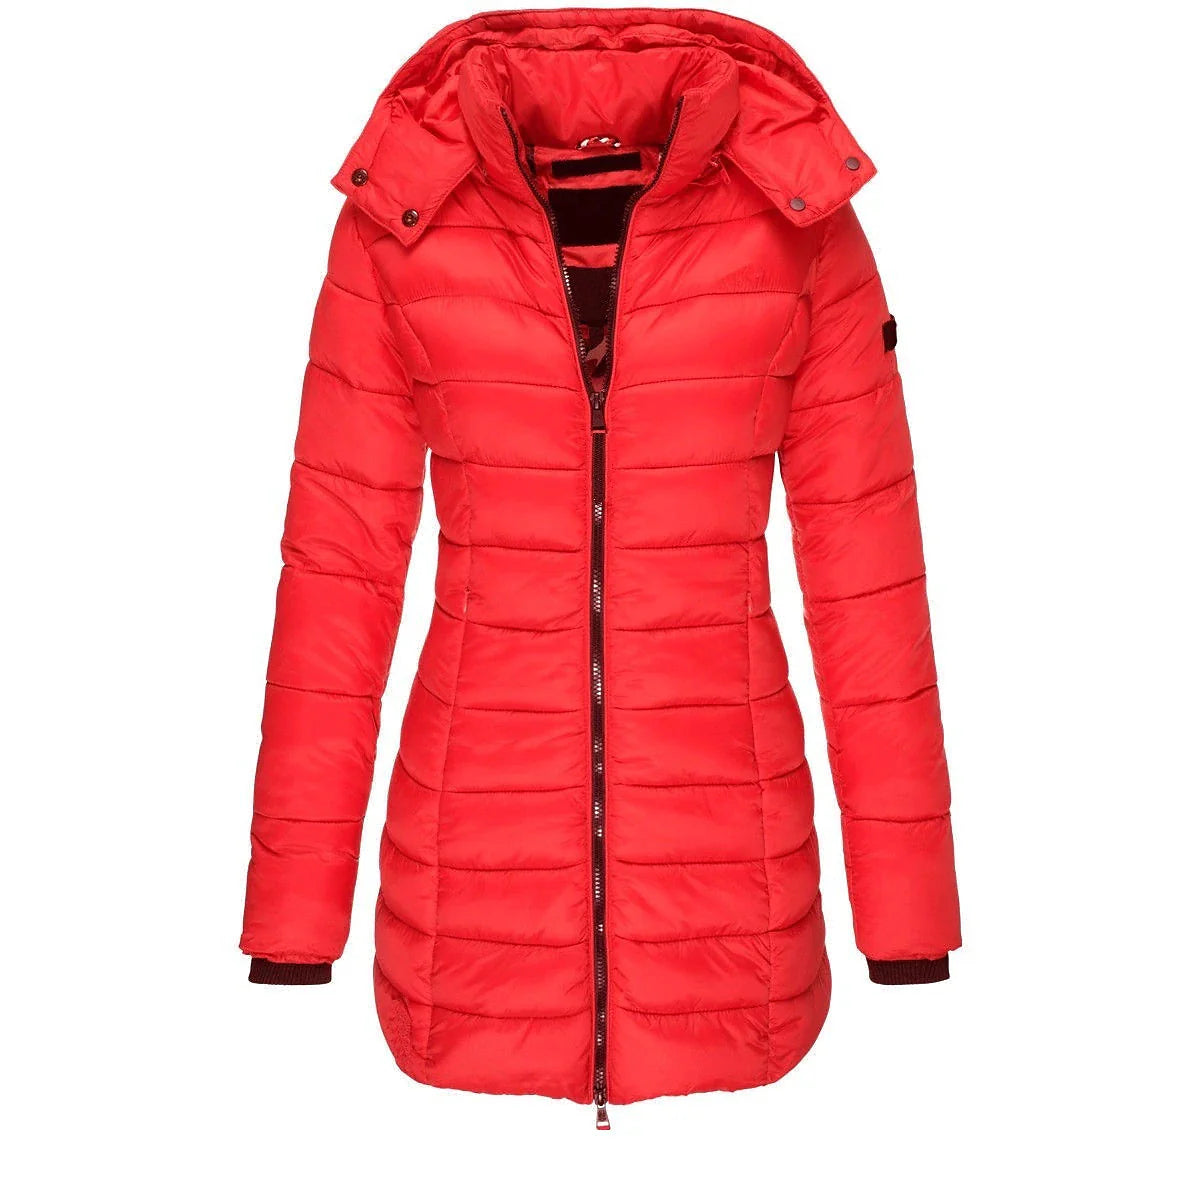 Women's Puffer Jacket Insulated Jacket Hiking Windbreaker Winter Outdoor Thermal Warm Waterproof Windproof Outerwear Mid Length Visible Zipper Fishing Climbing Camping Hiking